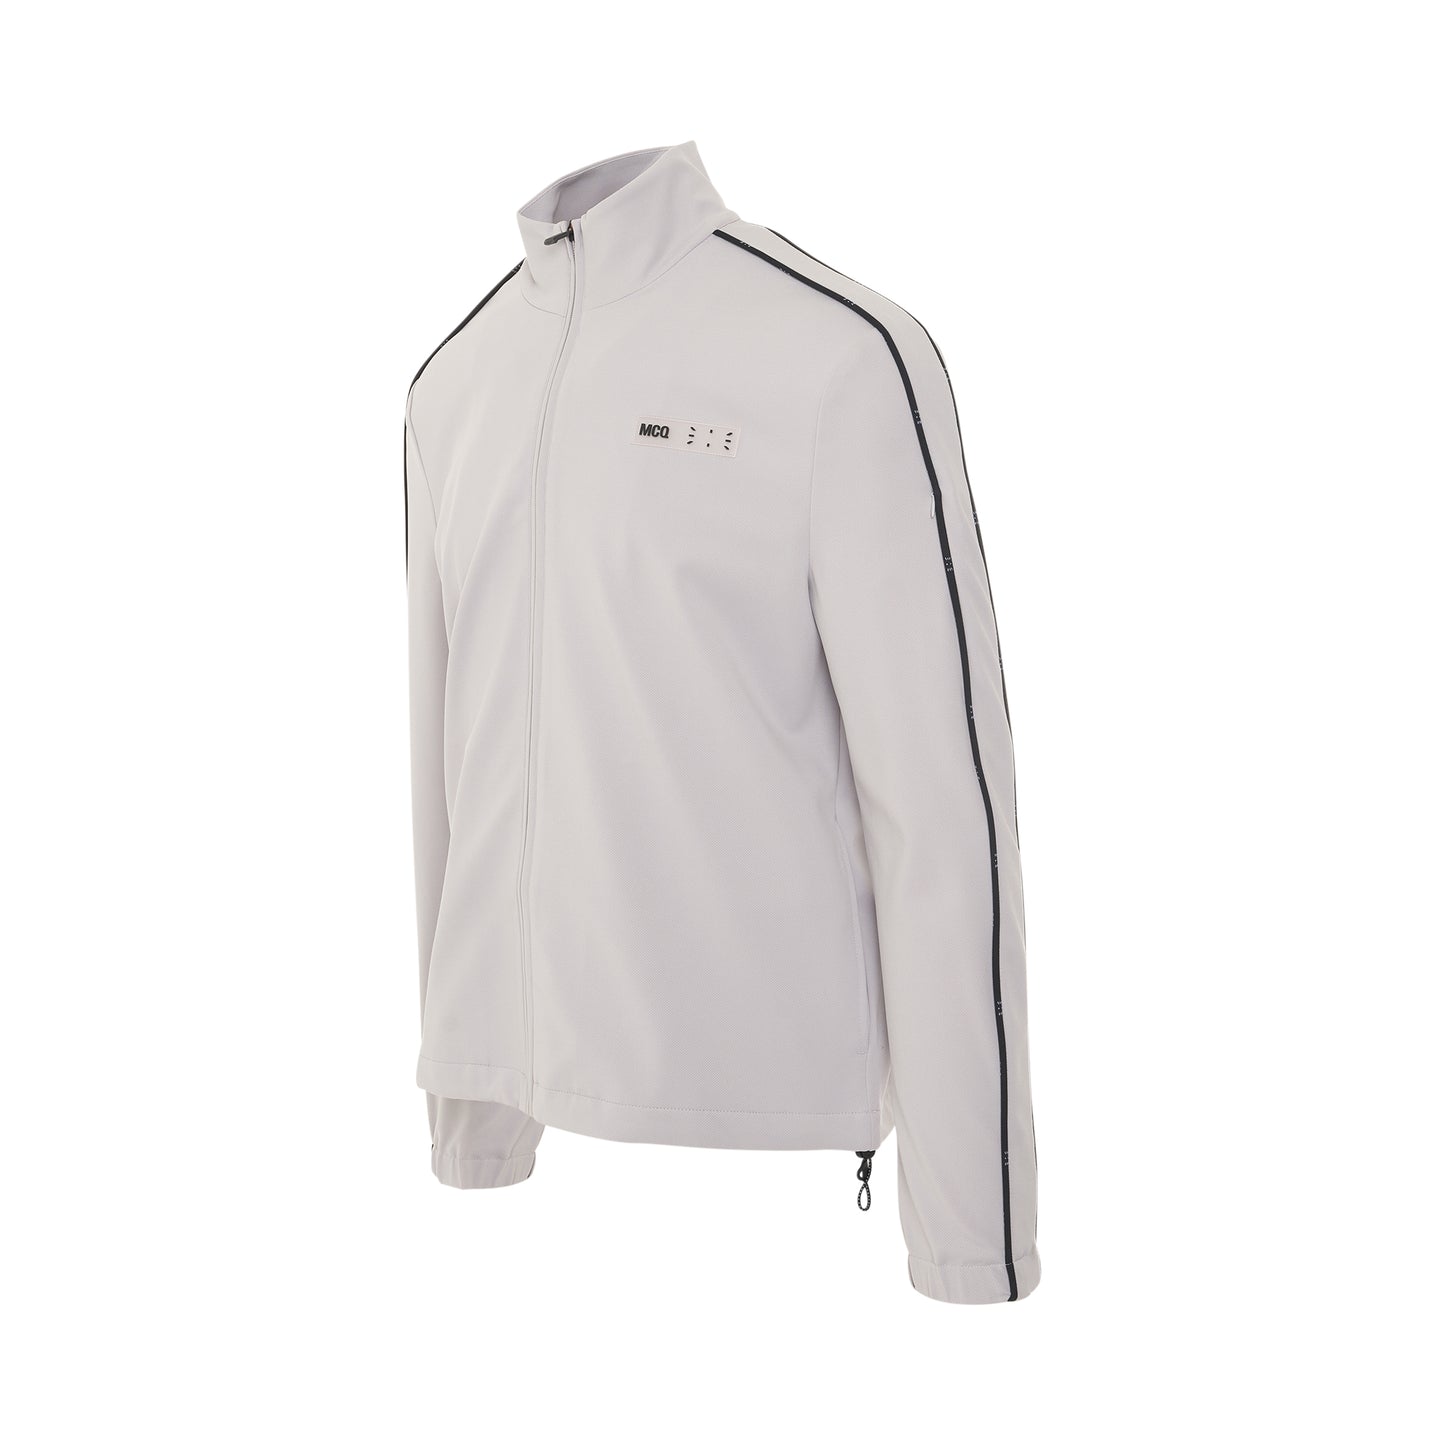 IC0 Track Suit Jacket in Alloy